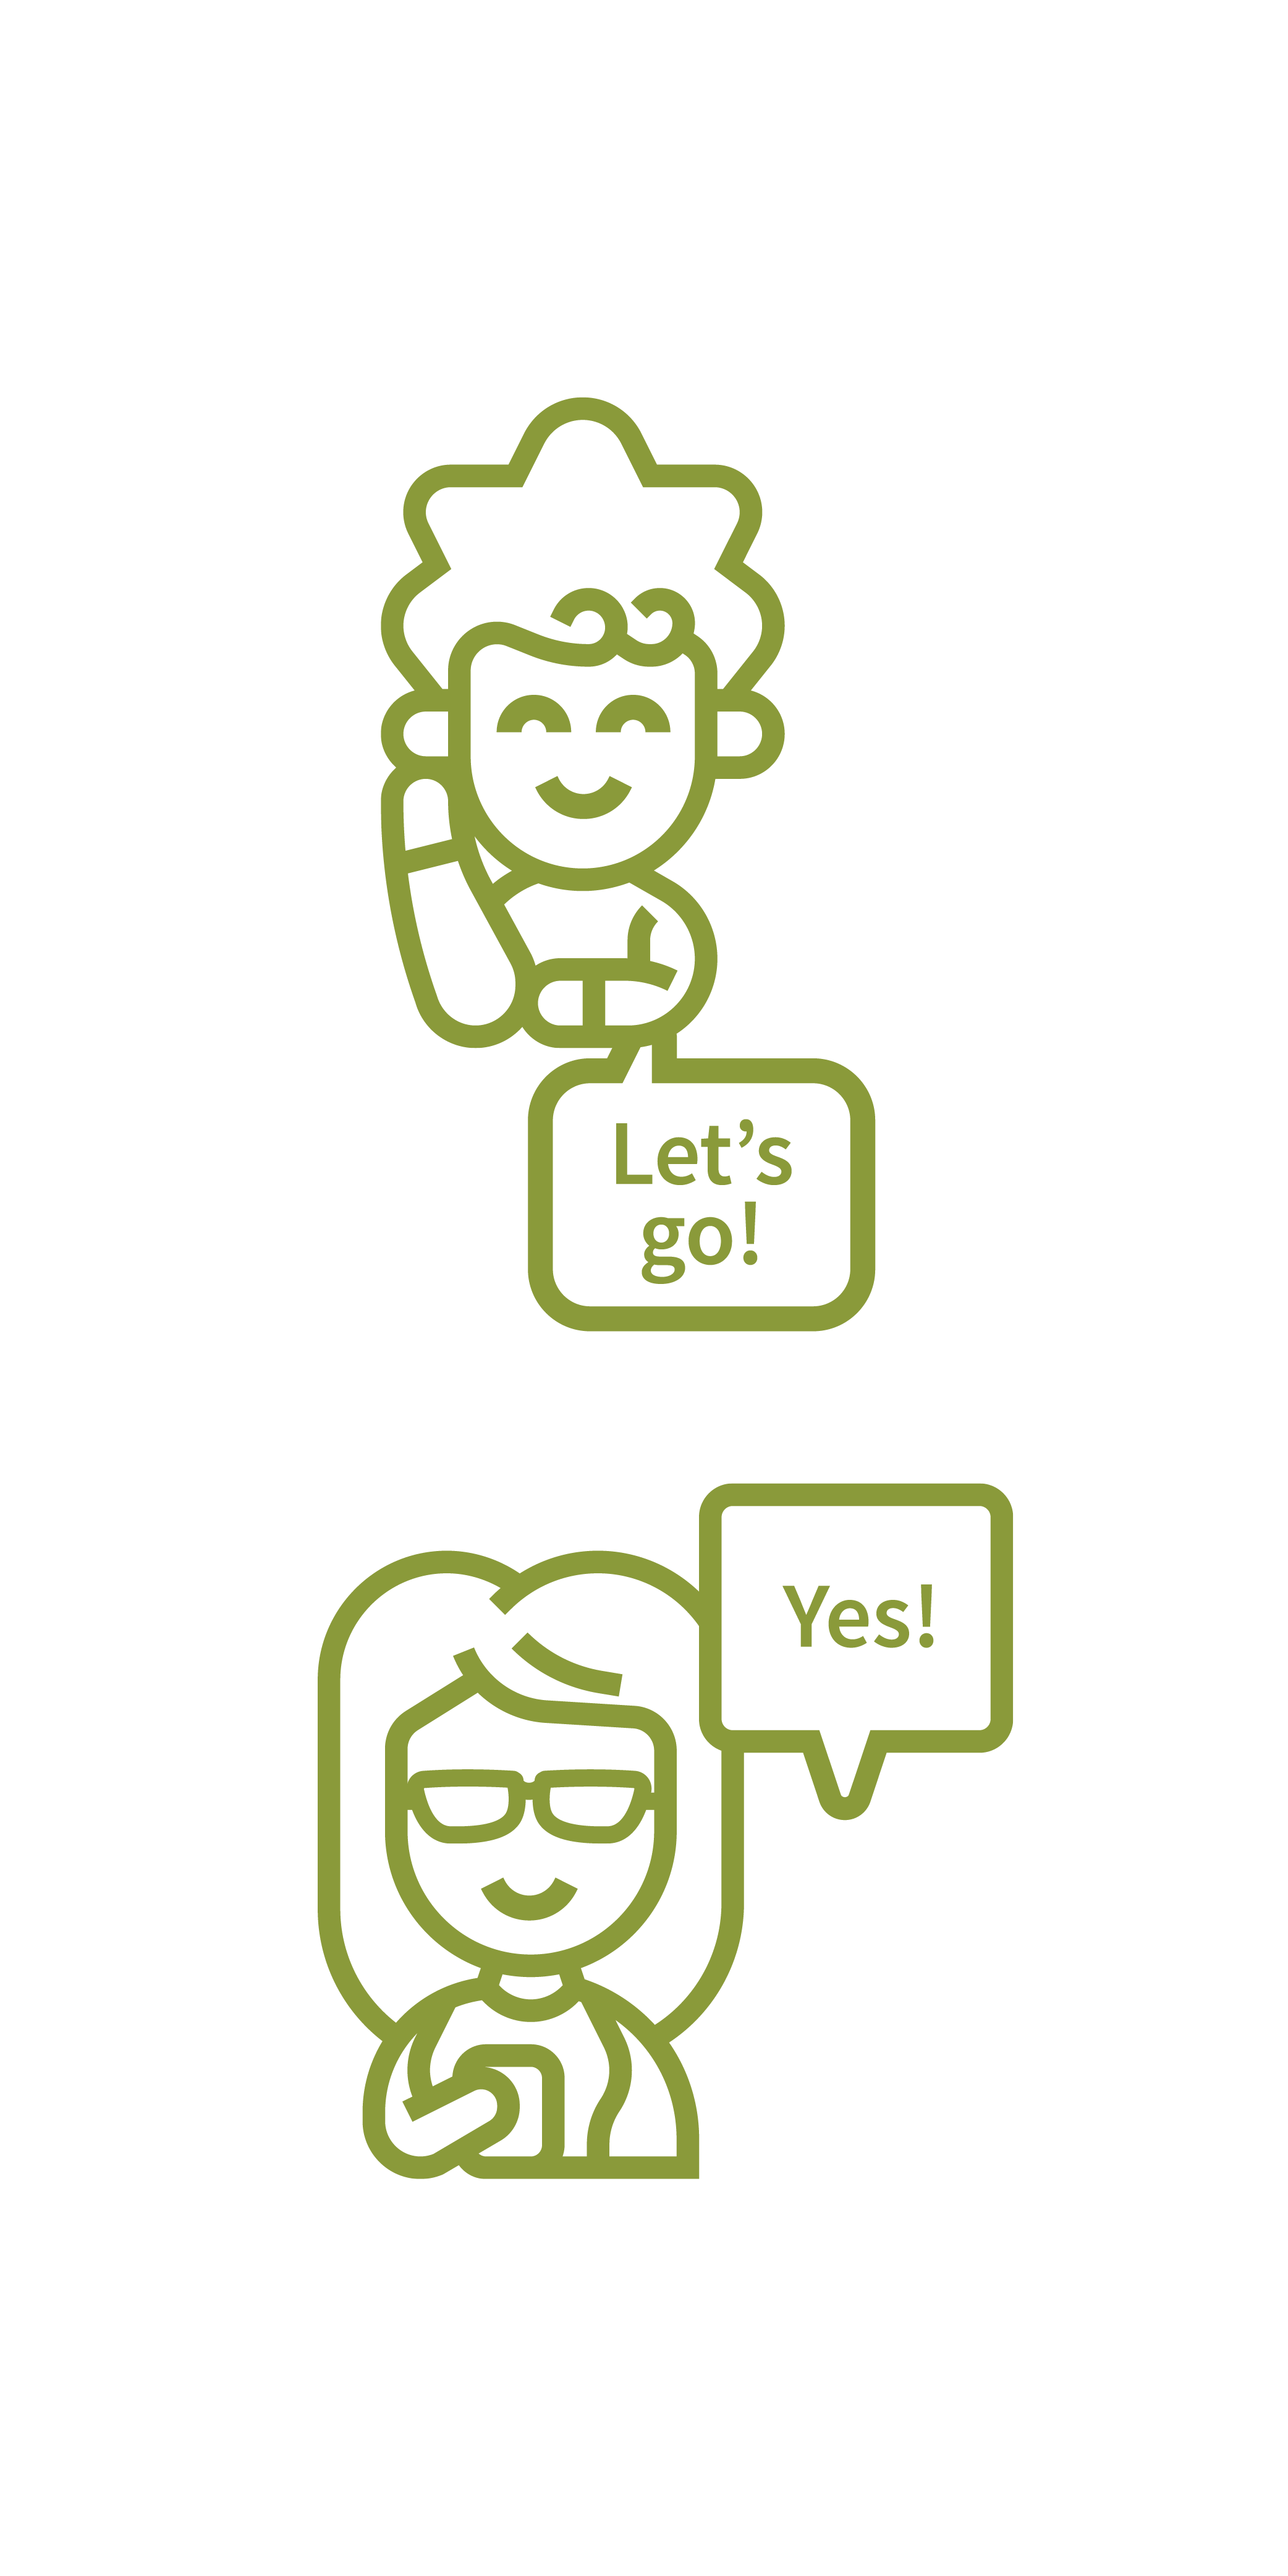 Man and Woman. Man has a speech bubble with 'Let's go'. Girl has speech bubble with 'Yes'